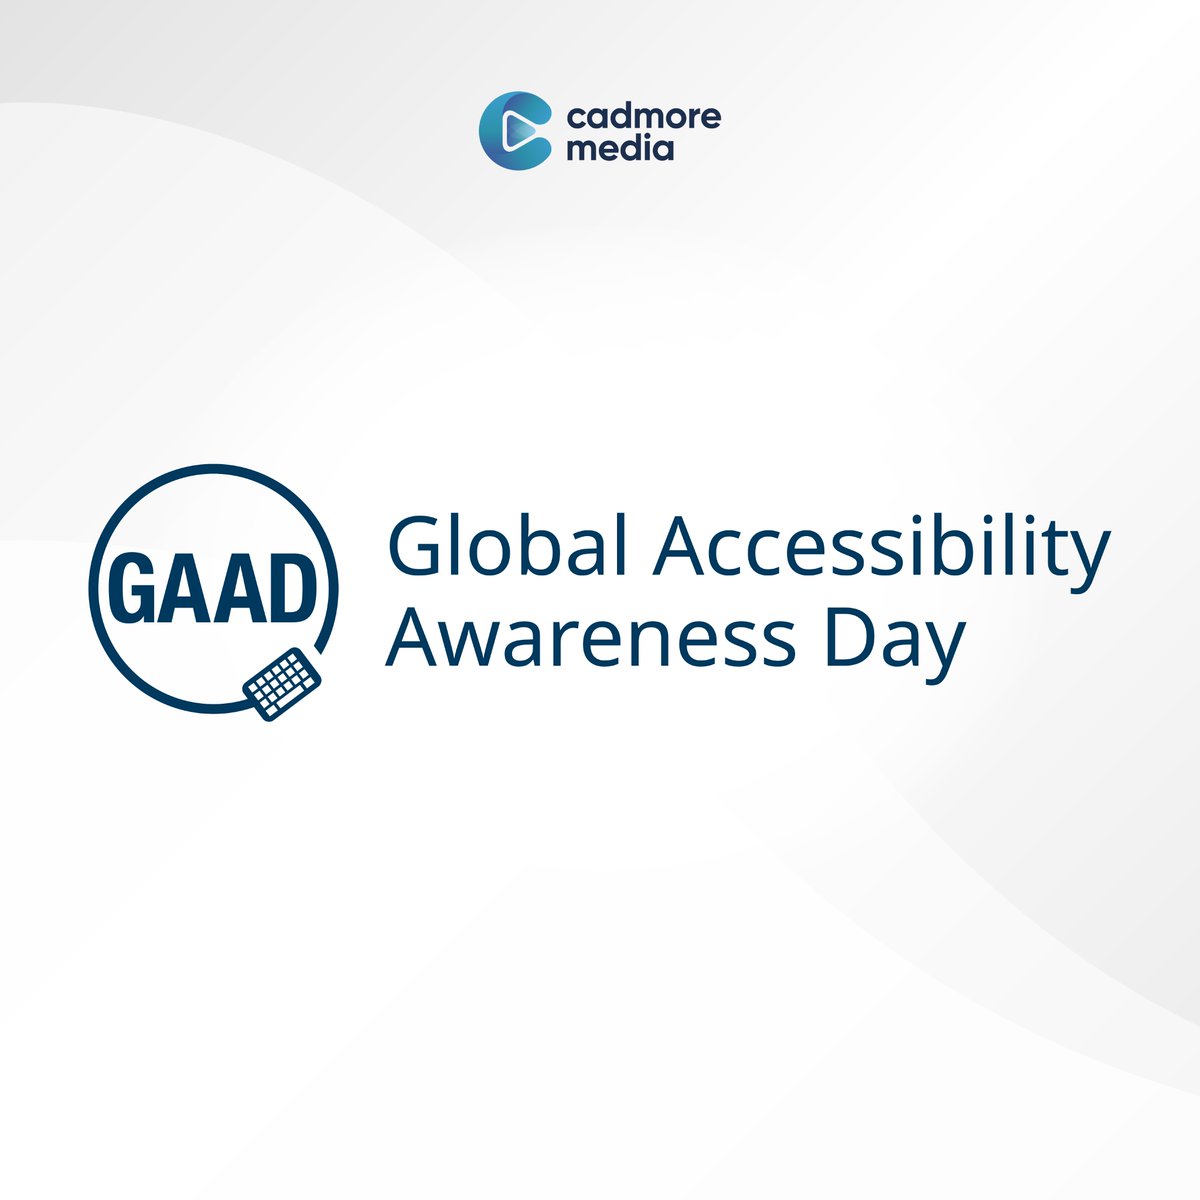 Join us celebrating #GlobalAccessibilityAwarenessDay! 
At Cadmore Media, we're dedicated to fostering digital inclusion for over one billion people worldwide with disabilities/impairments.

Digital accessibility ensures that everyone can independently engage with digital content.